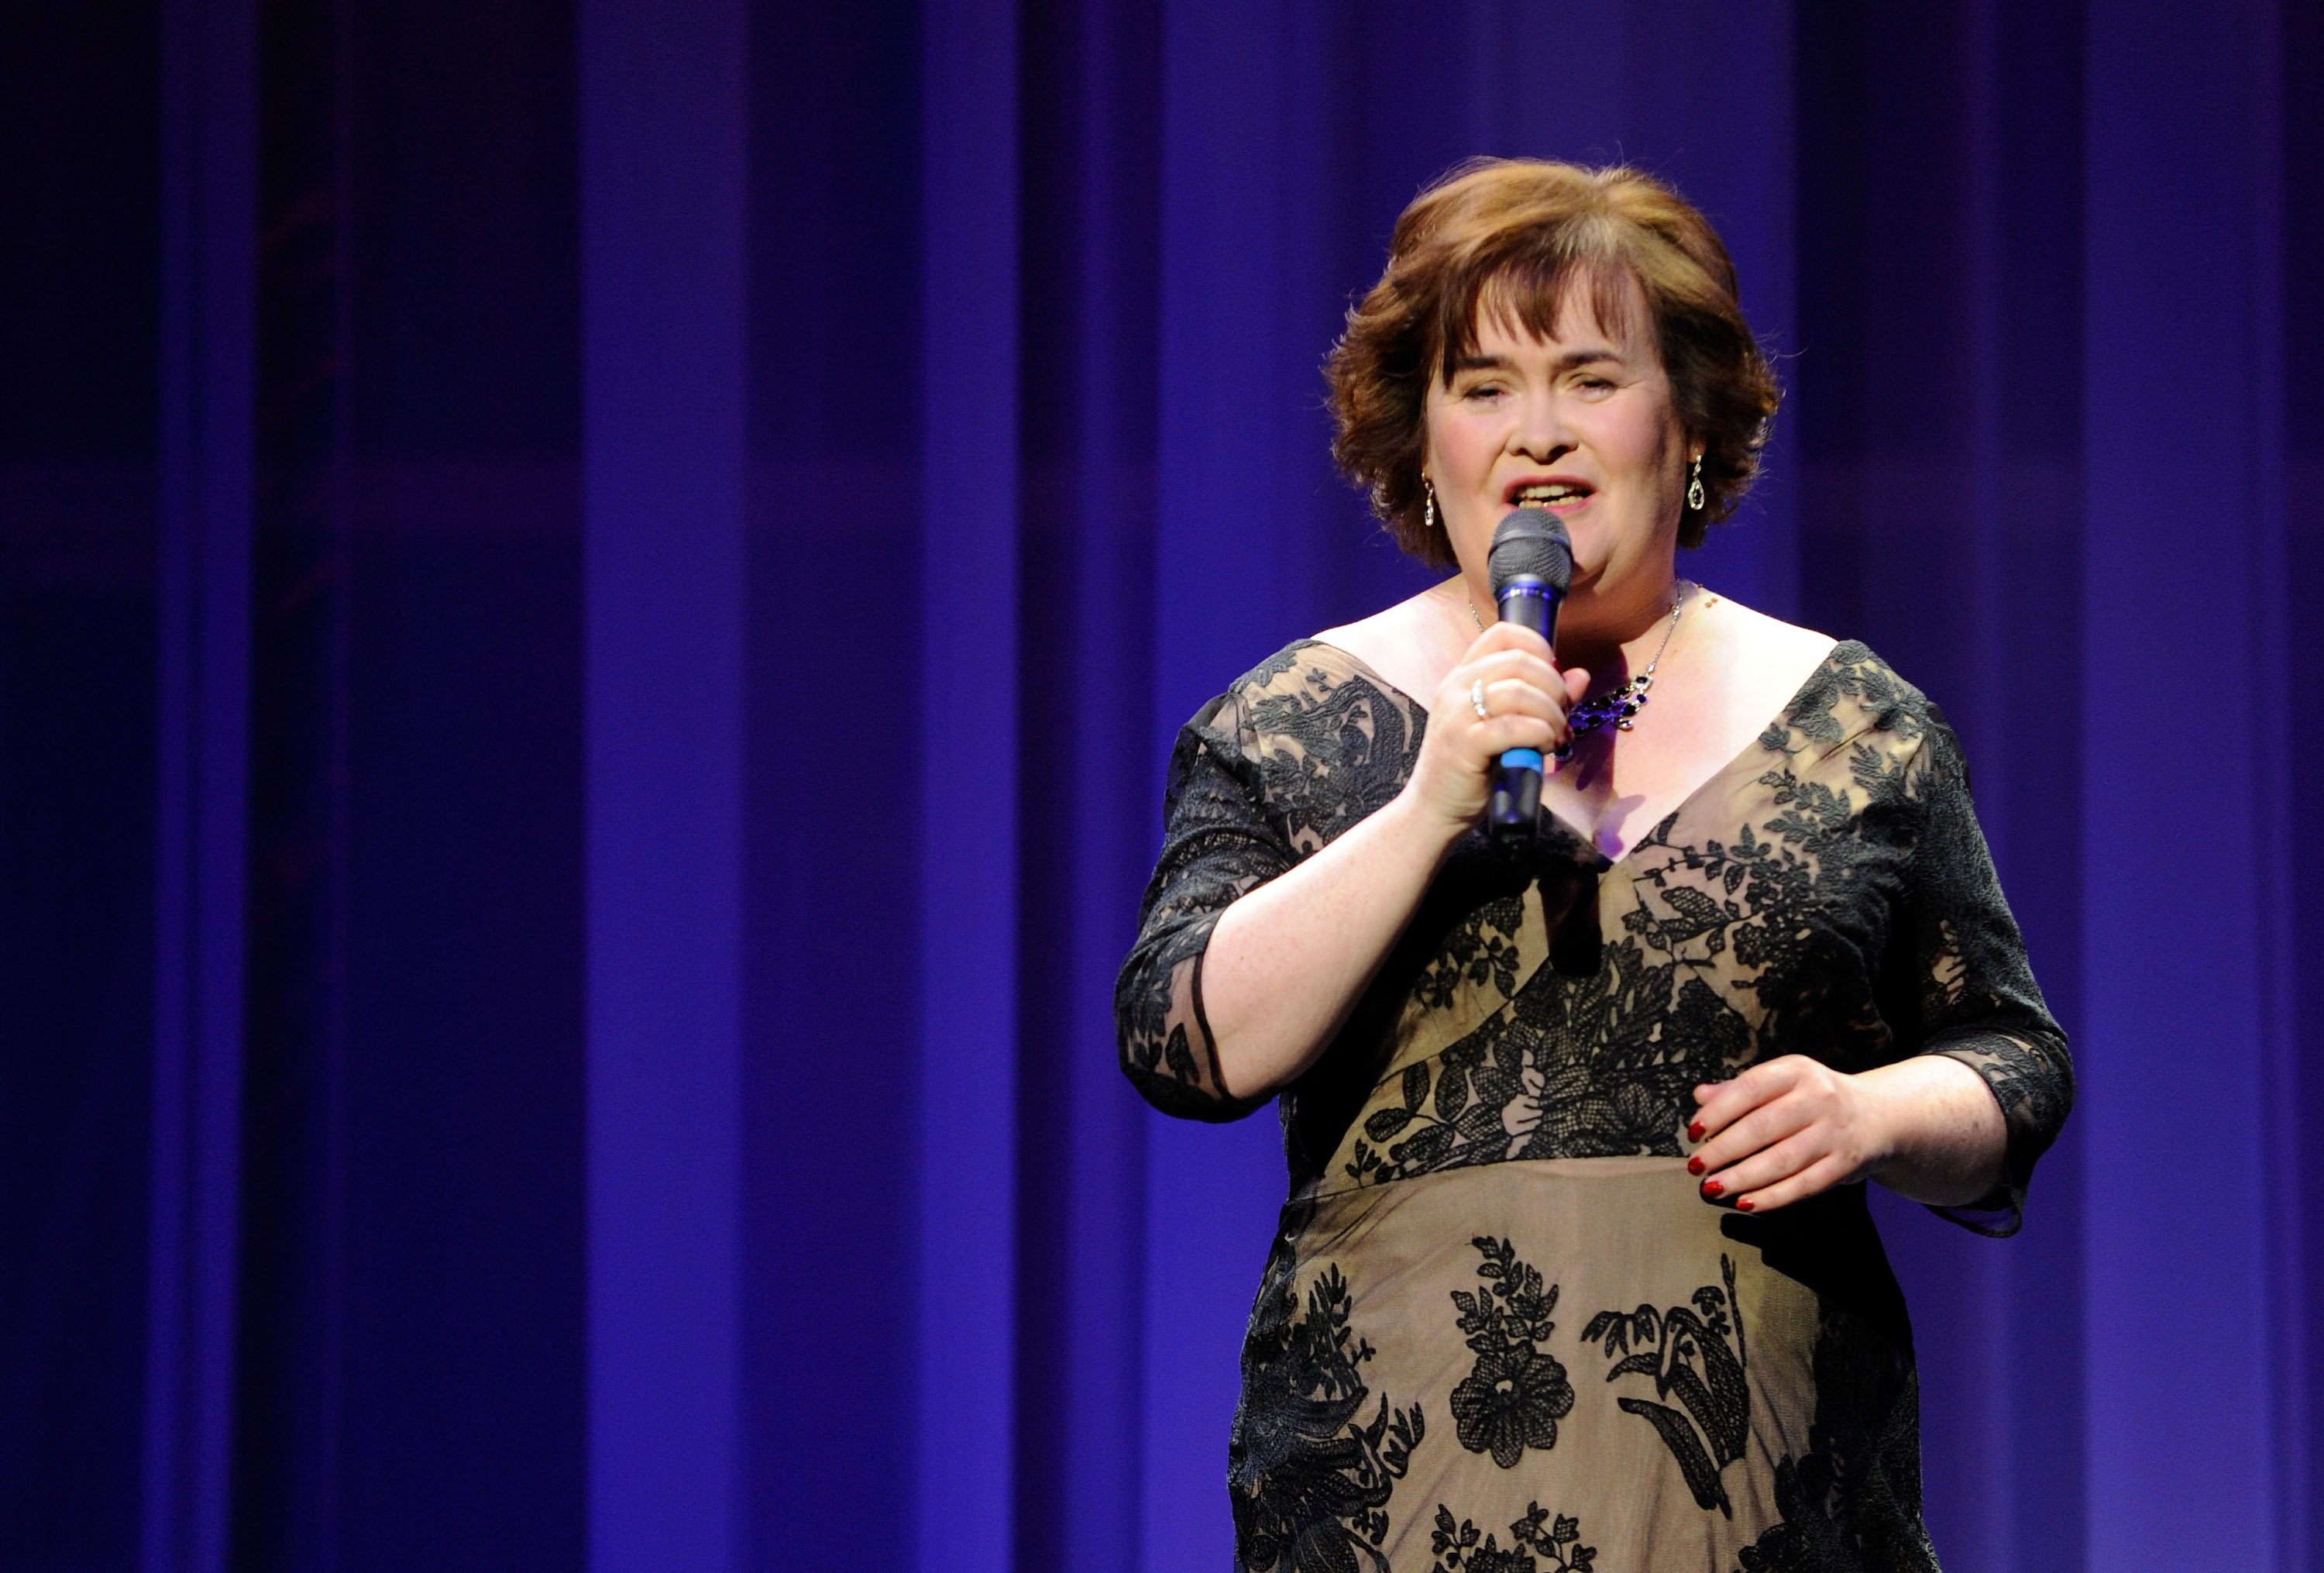  Susan Boyle performs during the Donny & Marie variety show at the Flamingo Las Vegas October 17, 2012. | Source: Getty Images